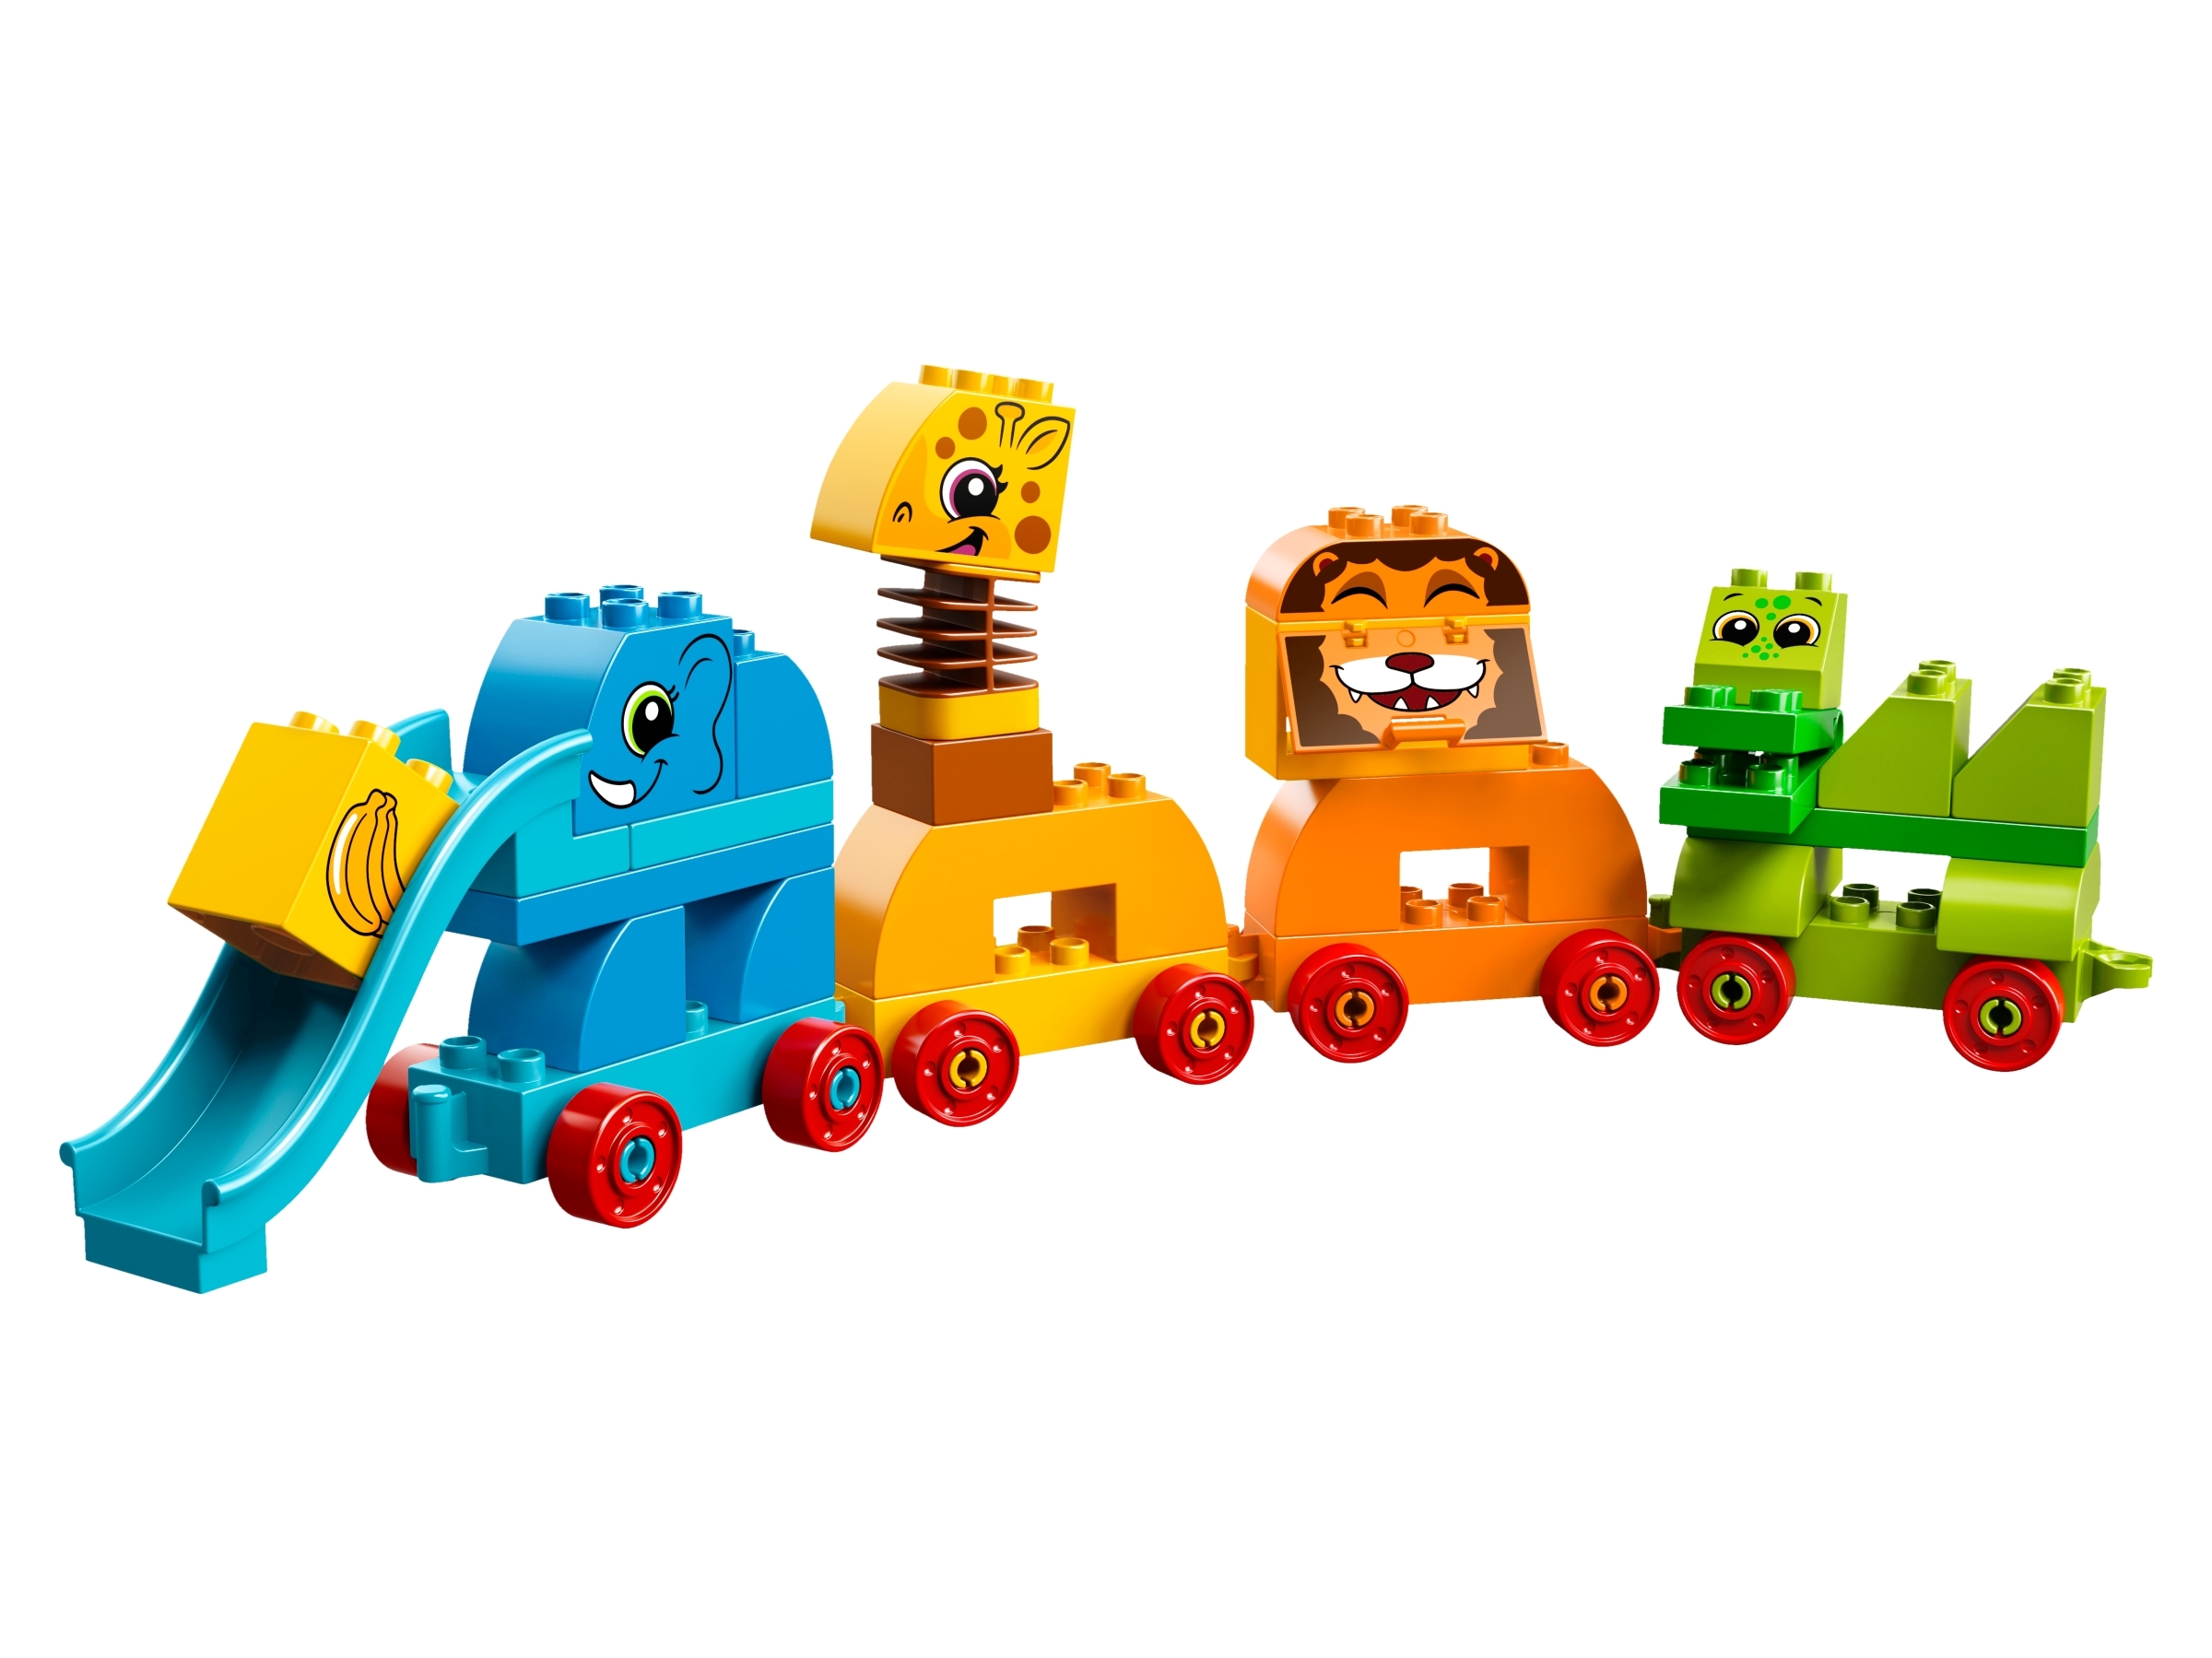 My First Animal Brick 10863 | DUPLO® | Buy online at the Official LEGO® Shop US